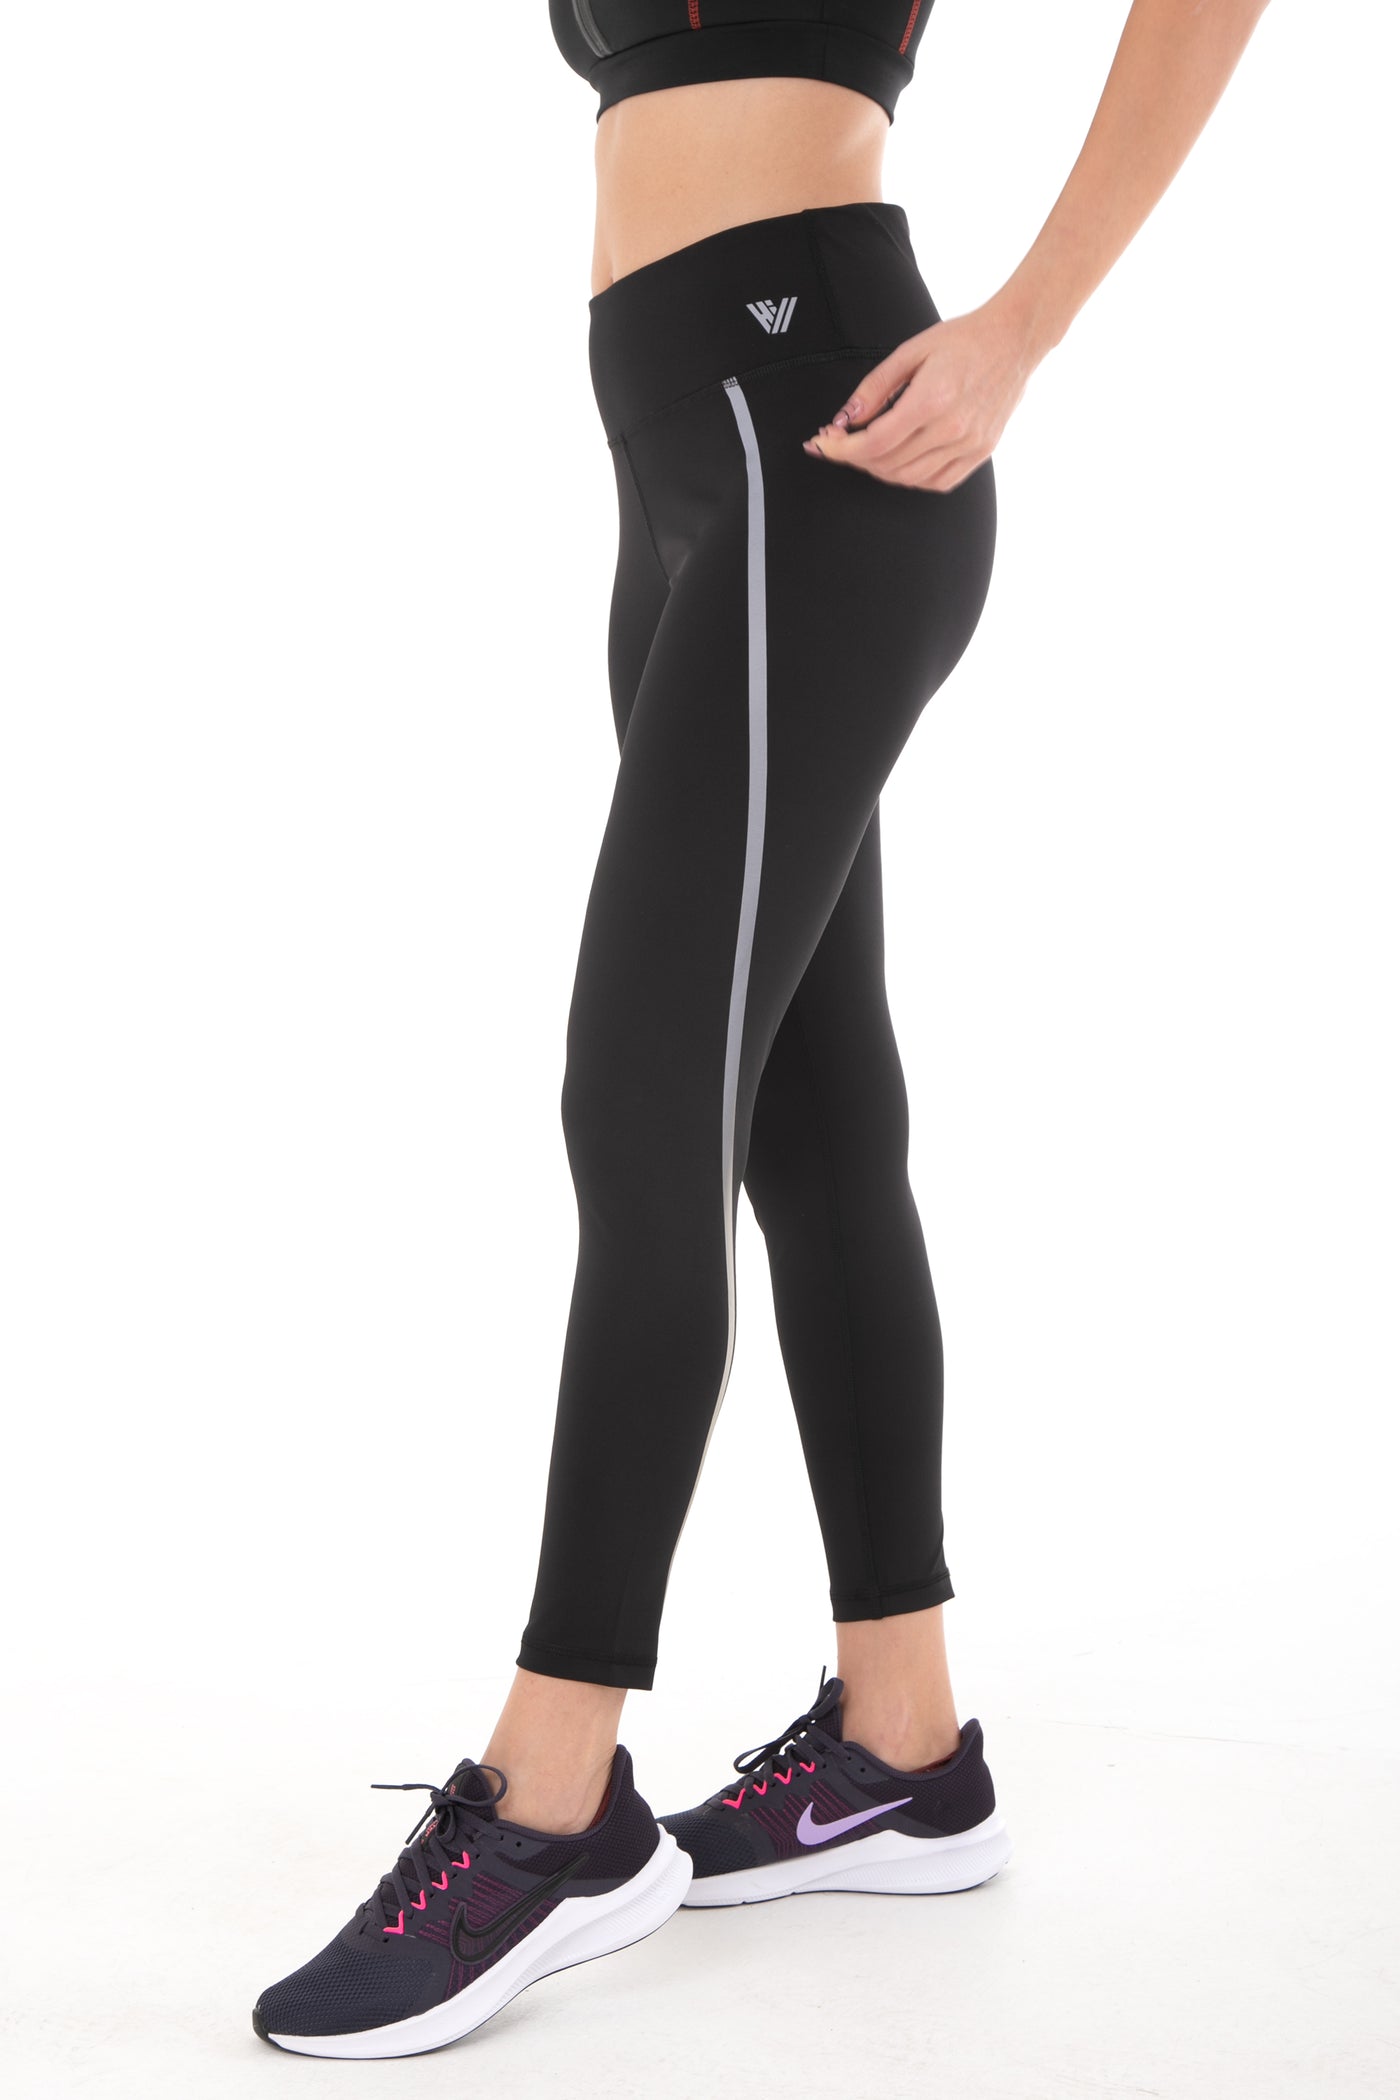 Hill & Dale Sports Legging With Reflector Tape